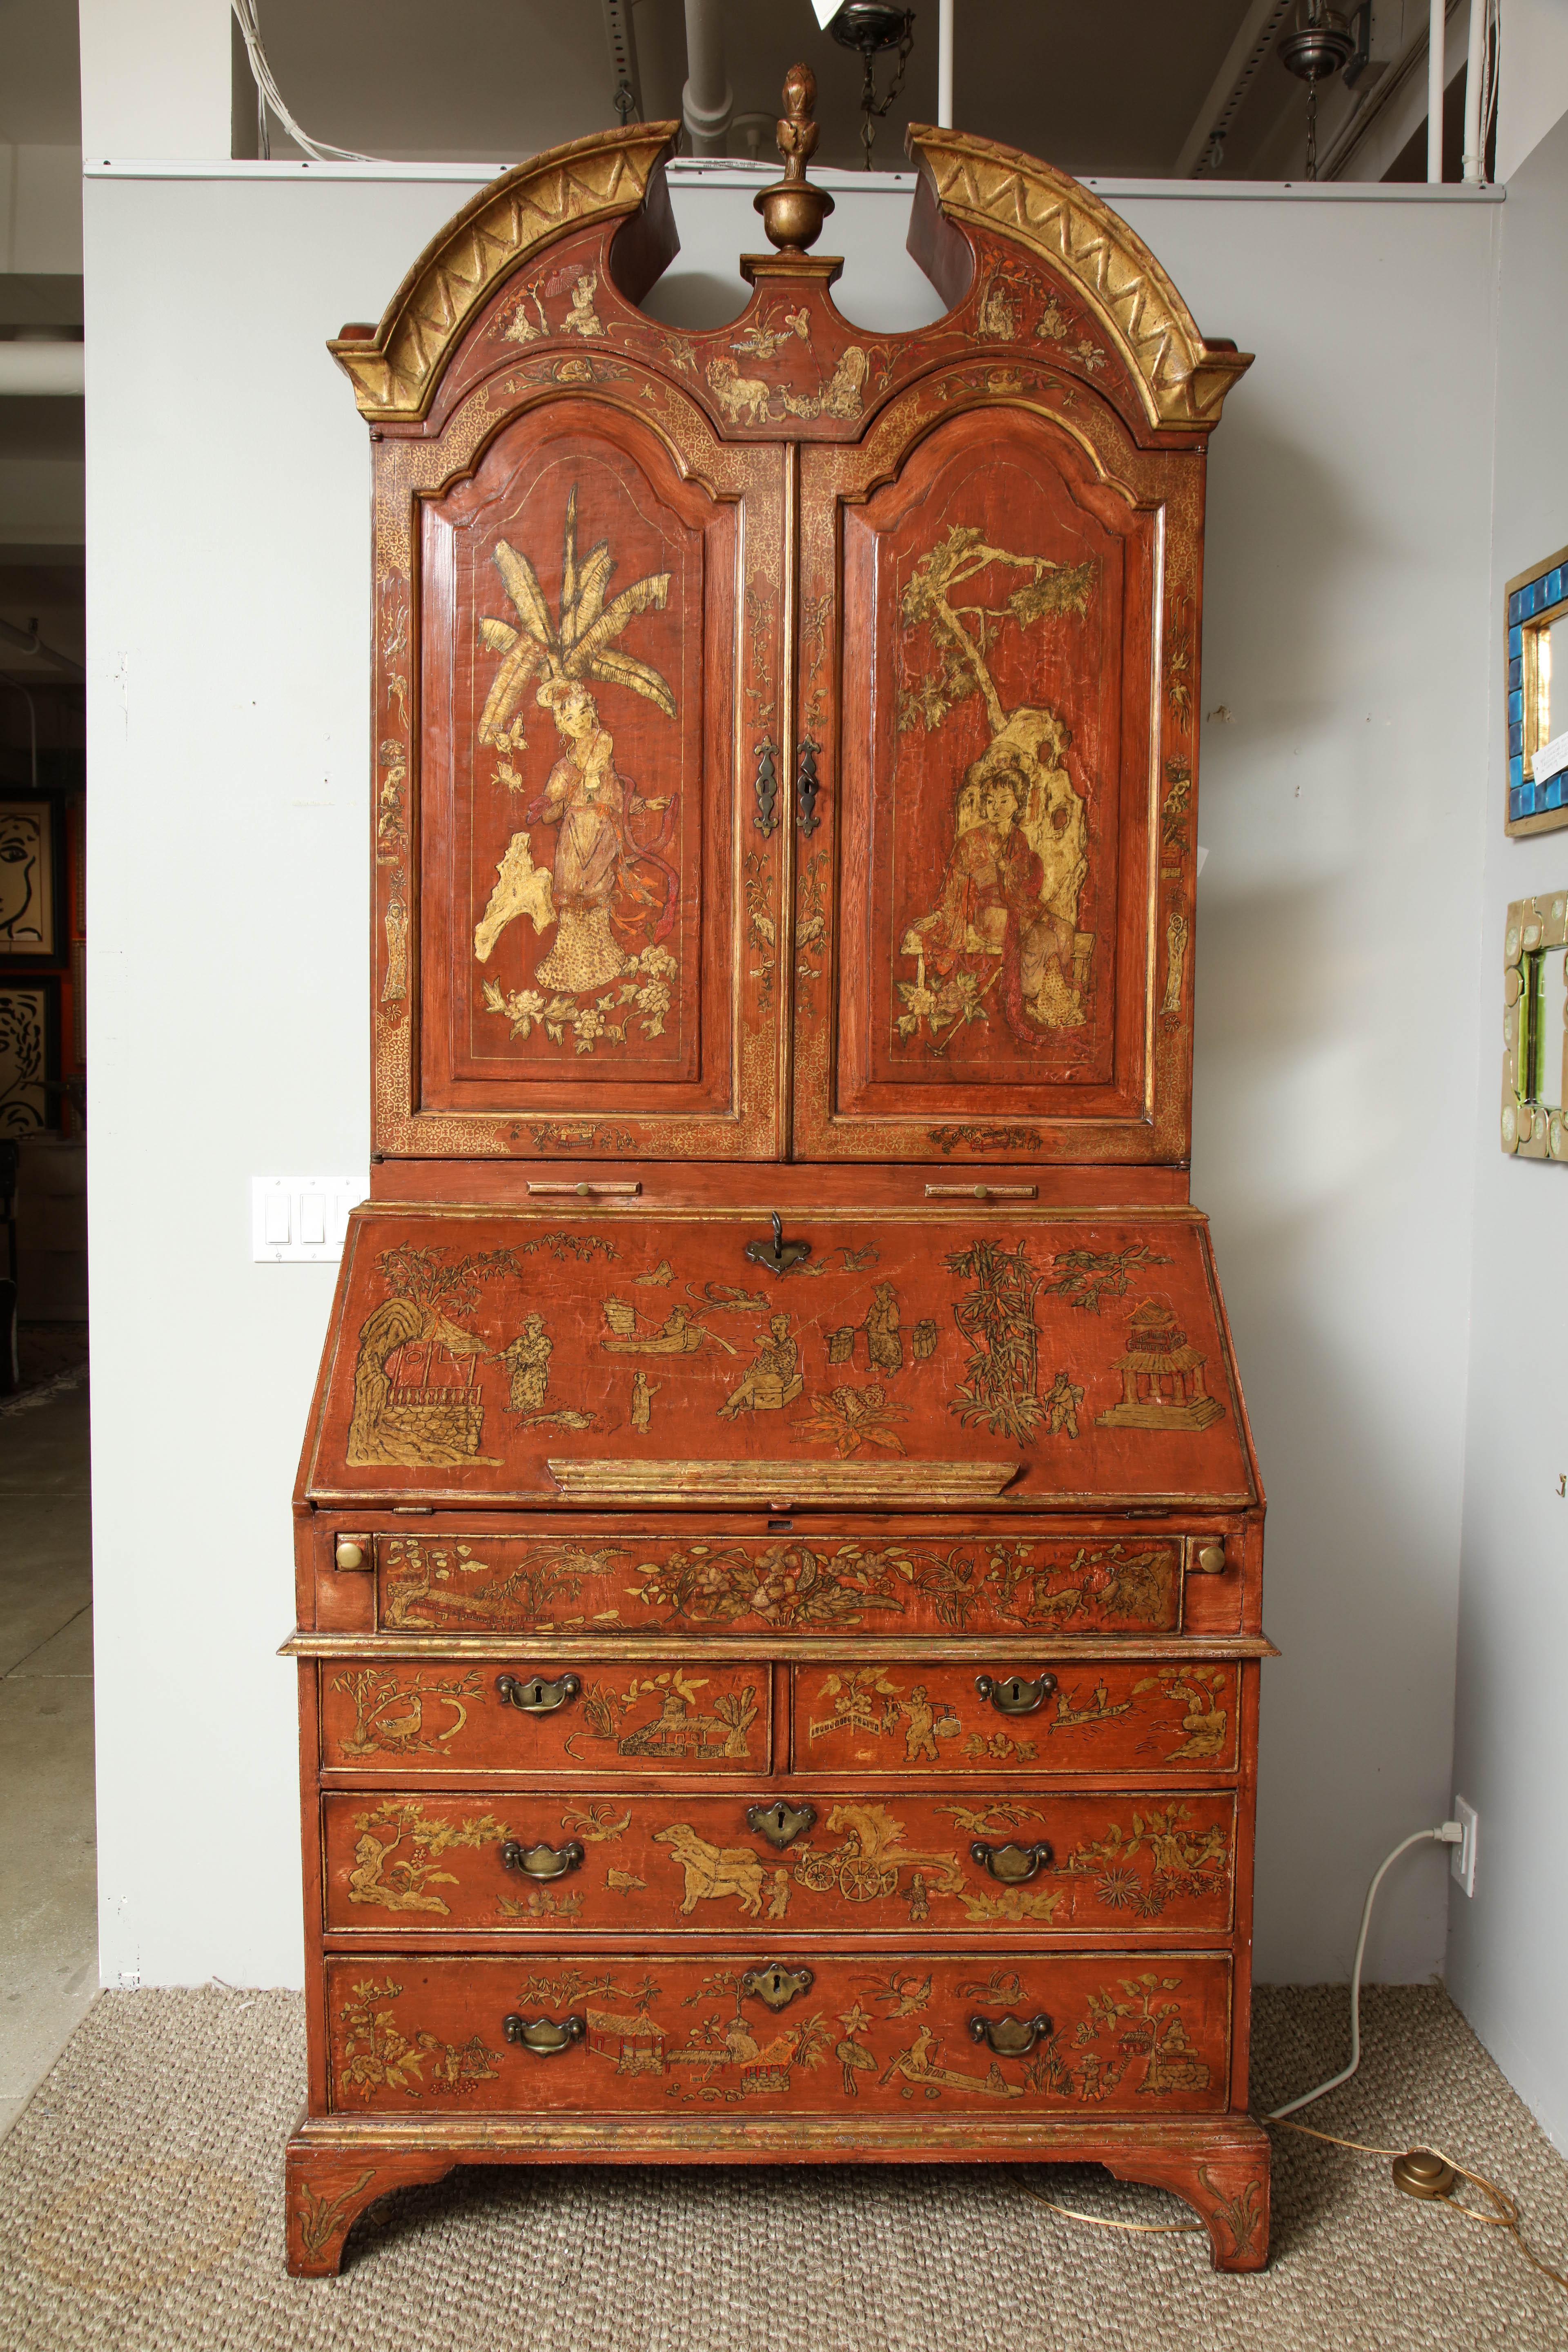 A George III secretary of exceptional quality dating from the late 18th century with later Chinoiserie lacquer and gilt decoration. There are so many wonderful, beautifully crafted details in this piece that it takes some time to really study it.